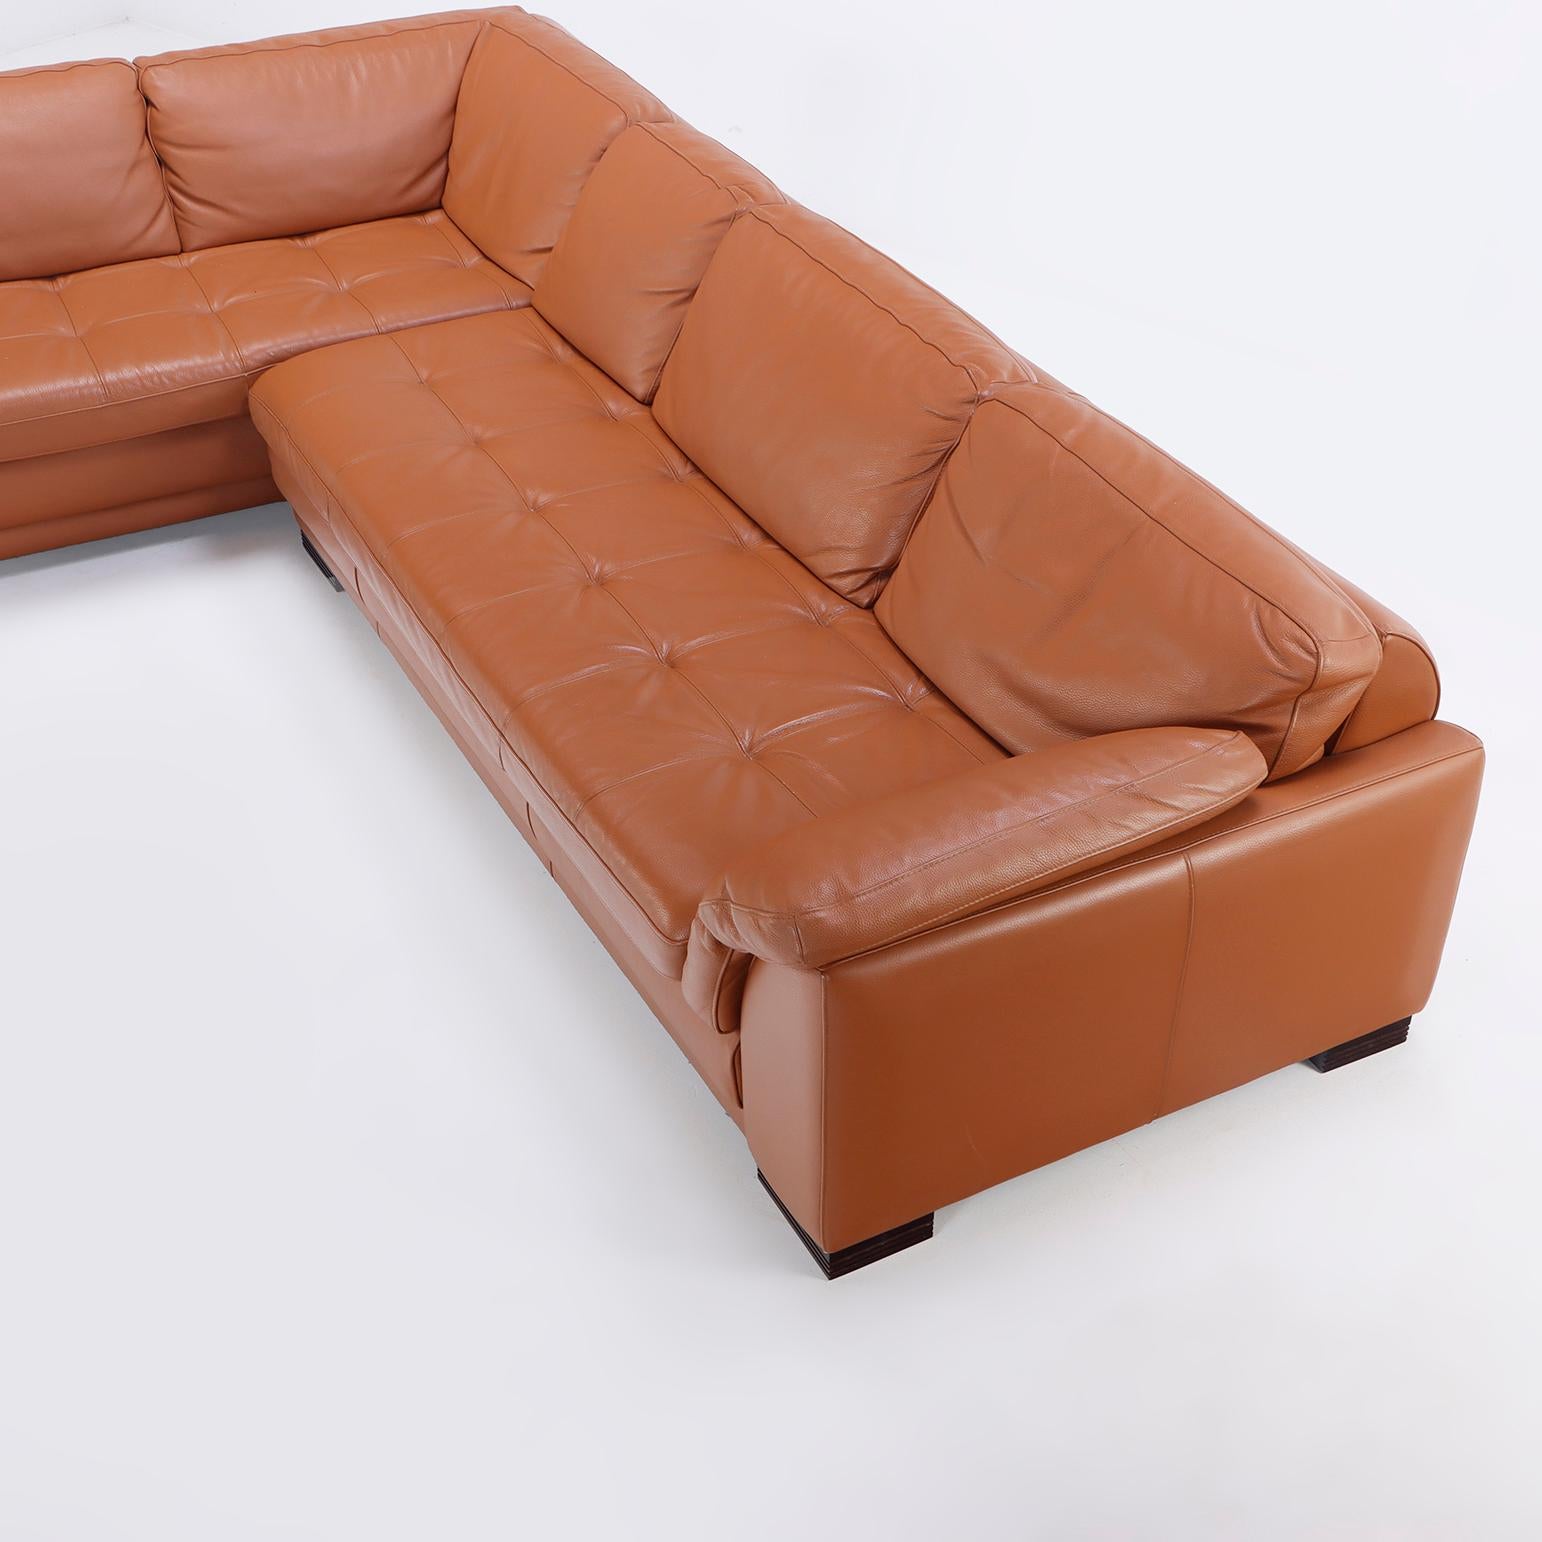 20th Century A French Roche Bobois leather sectional sofa. For Sale